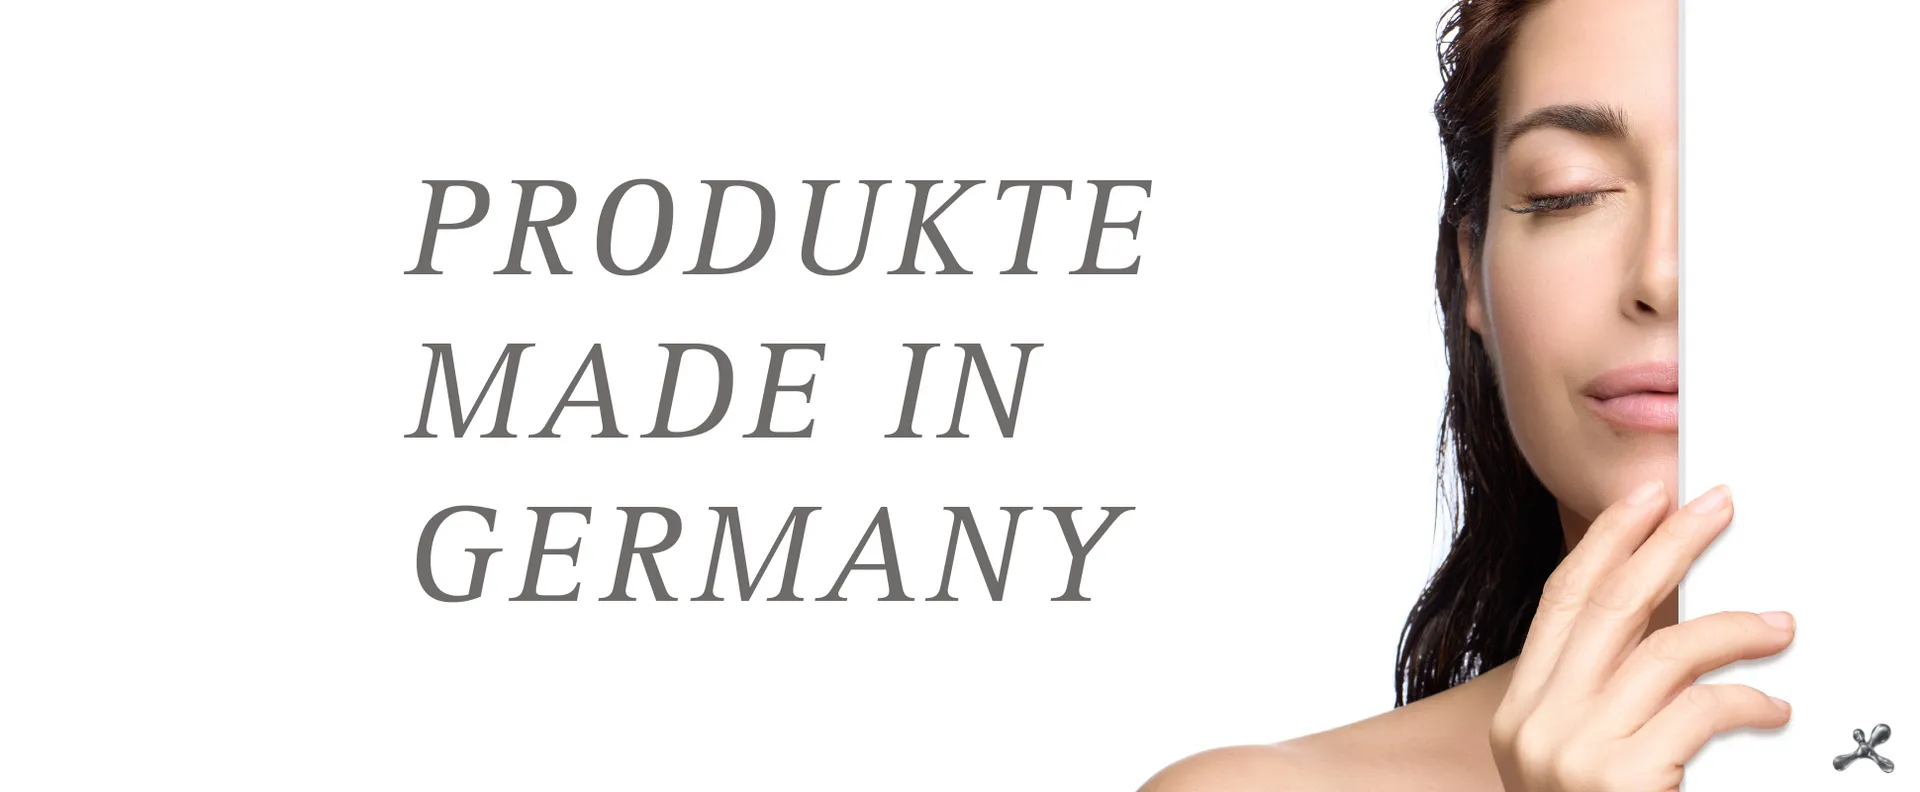 Naturelize Produkte made in Germany